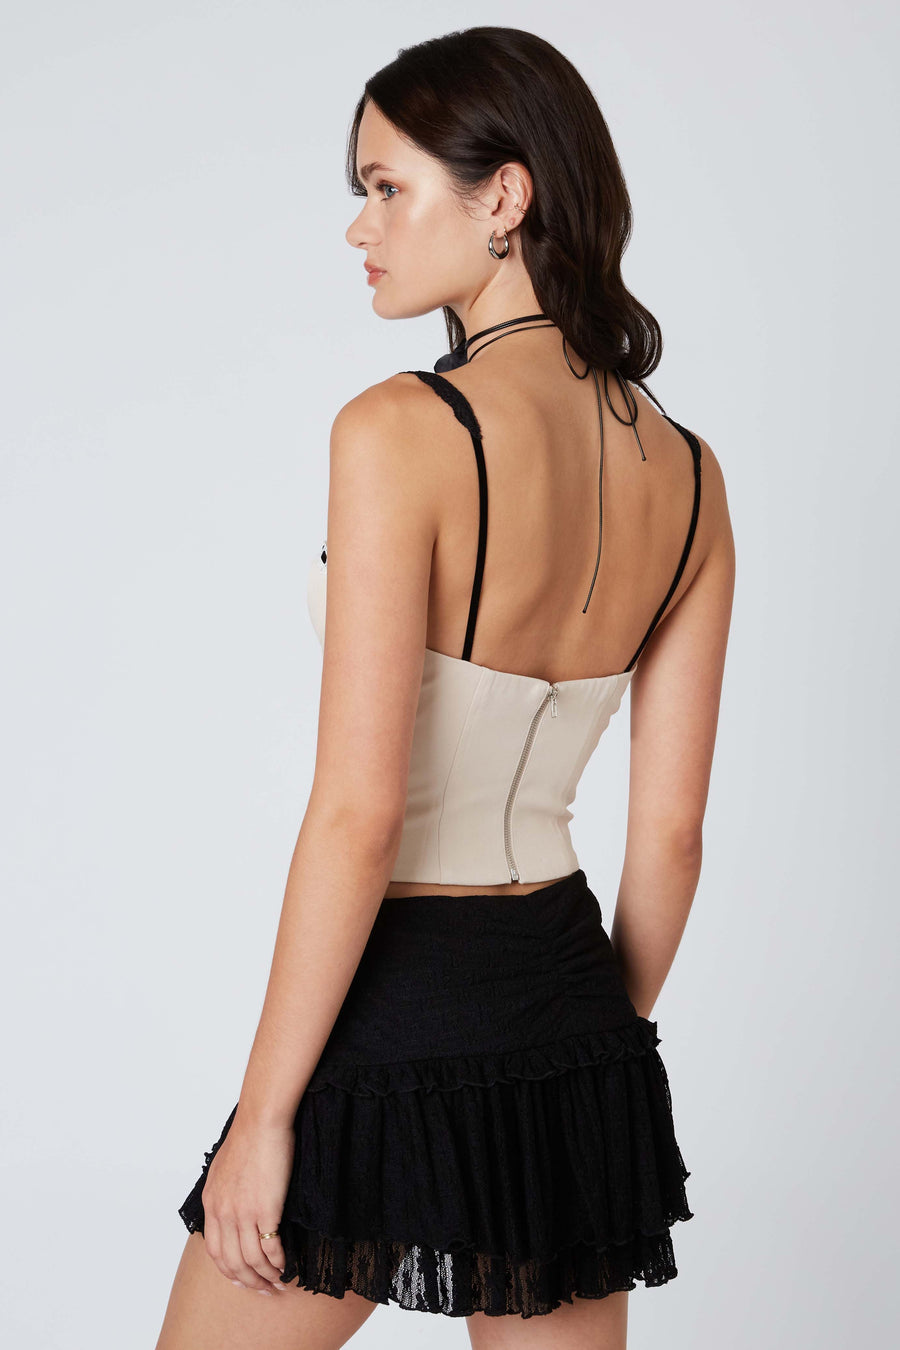 Slightly cropped top with ribbon detail along the neckline and lace straps.